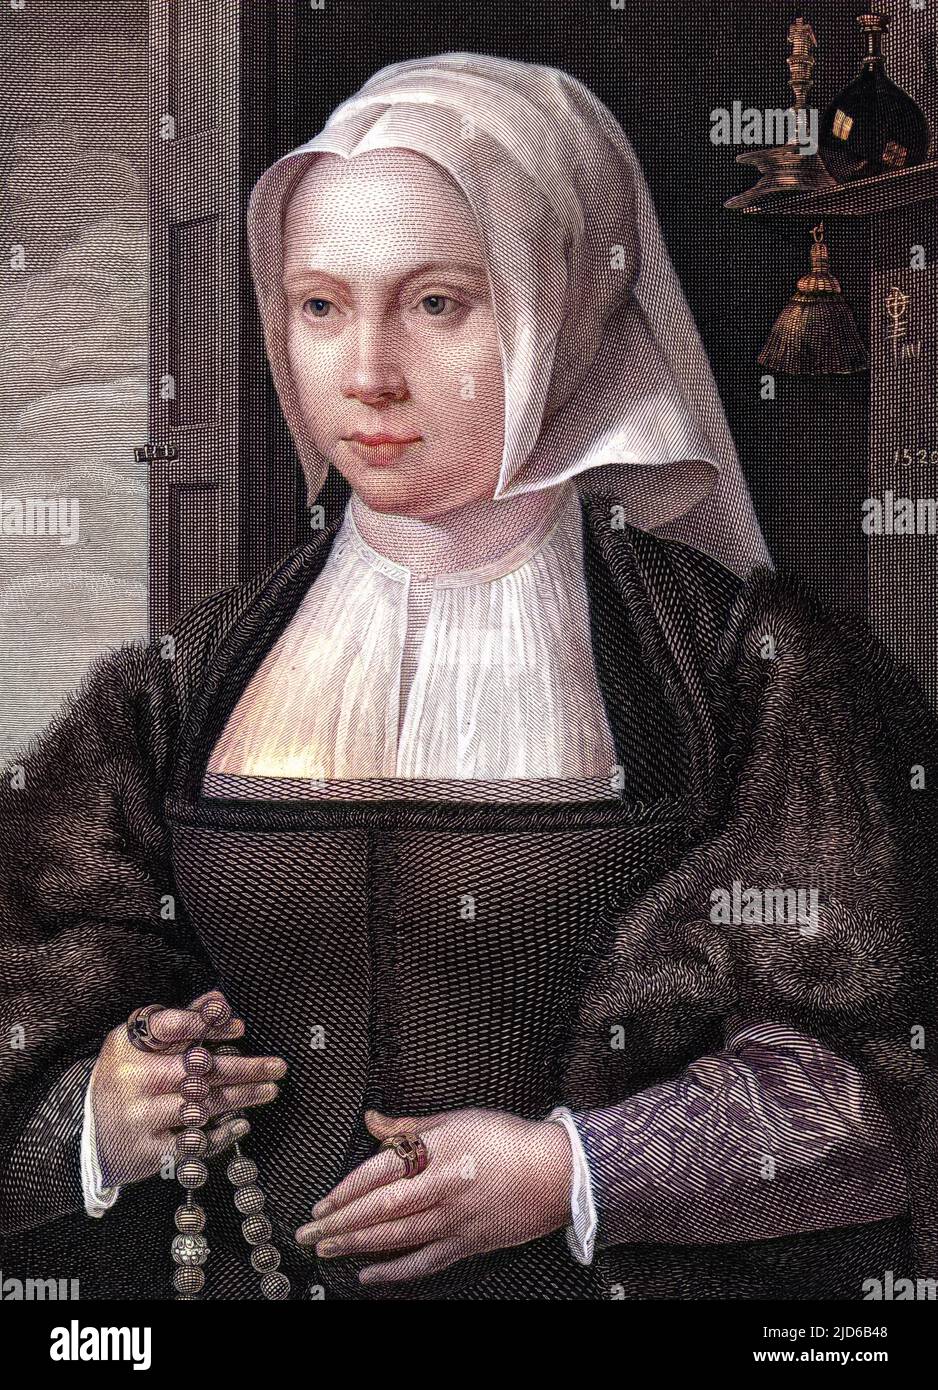 The wife of QUENTIN MASSYS, toying with a necklace. Colourised version of : 10164654       Date: circa 1500 Stock Photo